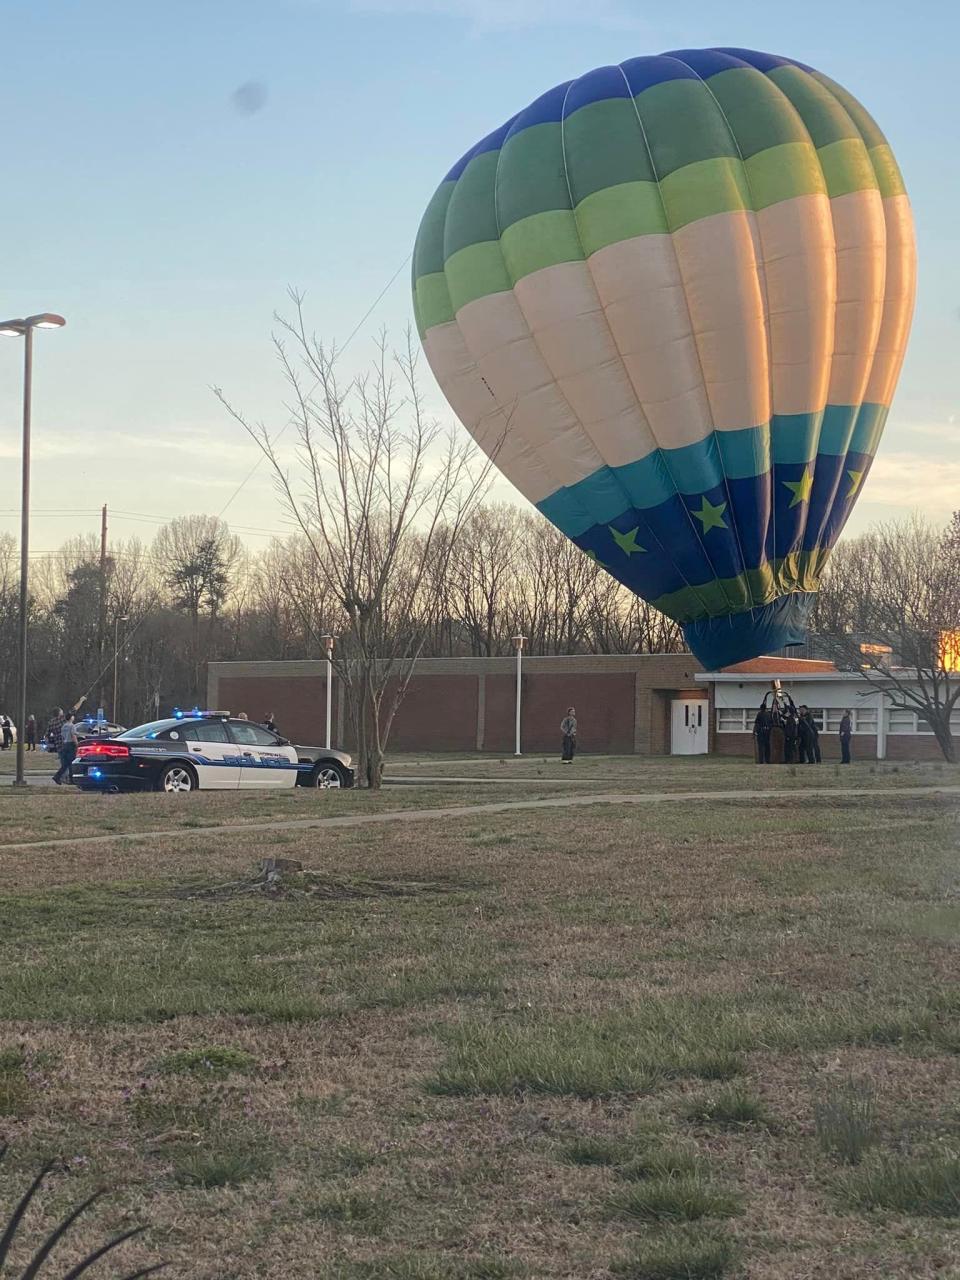 A hot-air balloon touches down in an emergency landing Sunday, March 5, 2023 at Carter G. Woodson Middle School in Hopewell. No injuries were reported, and the scene was cleared quickly.